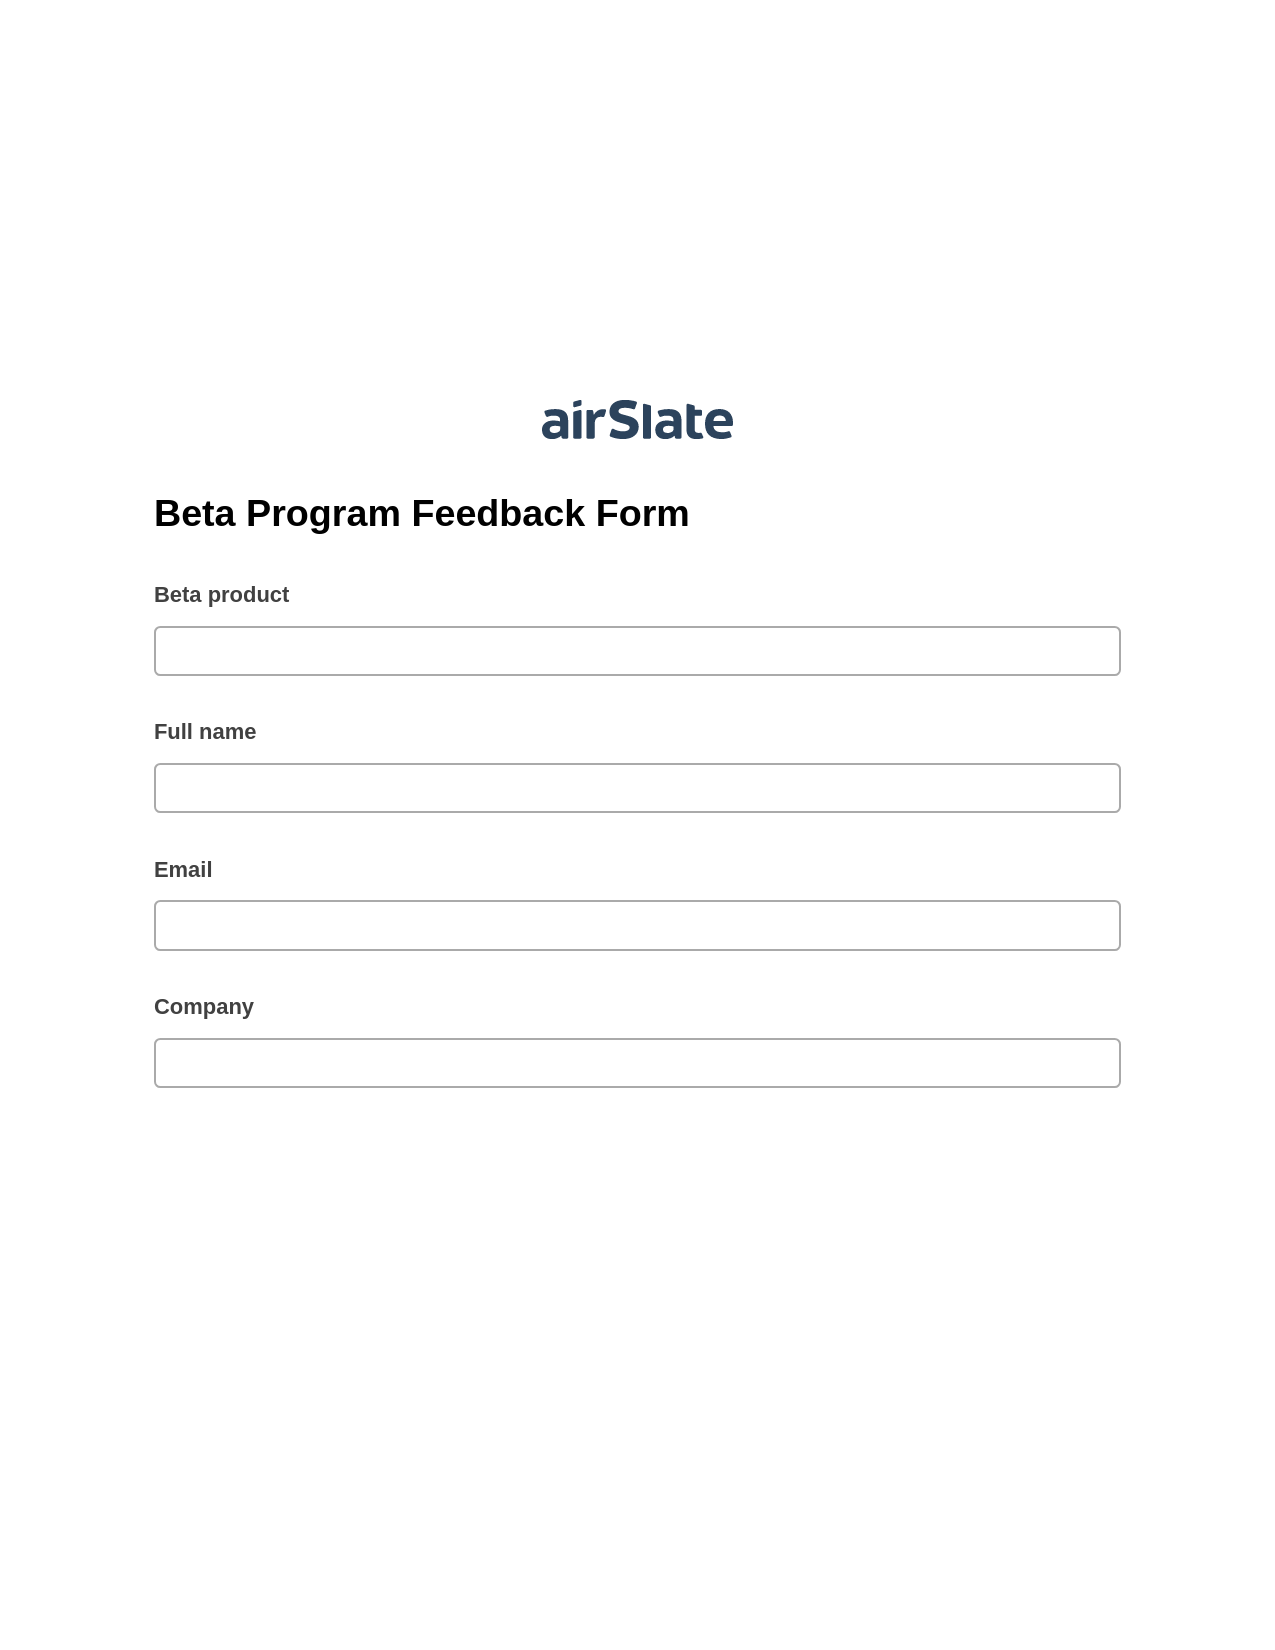 Beta Program Feedback Form Pre-fill from Google Sheets Bot, Update MS Dynamics 365 Records Bot, Archive to SharePoint Folder Bot